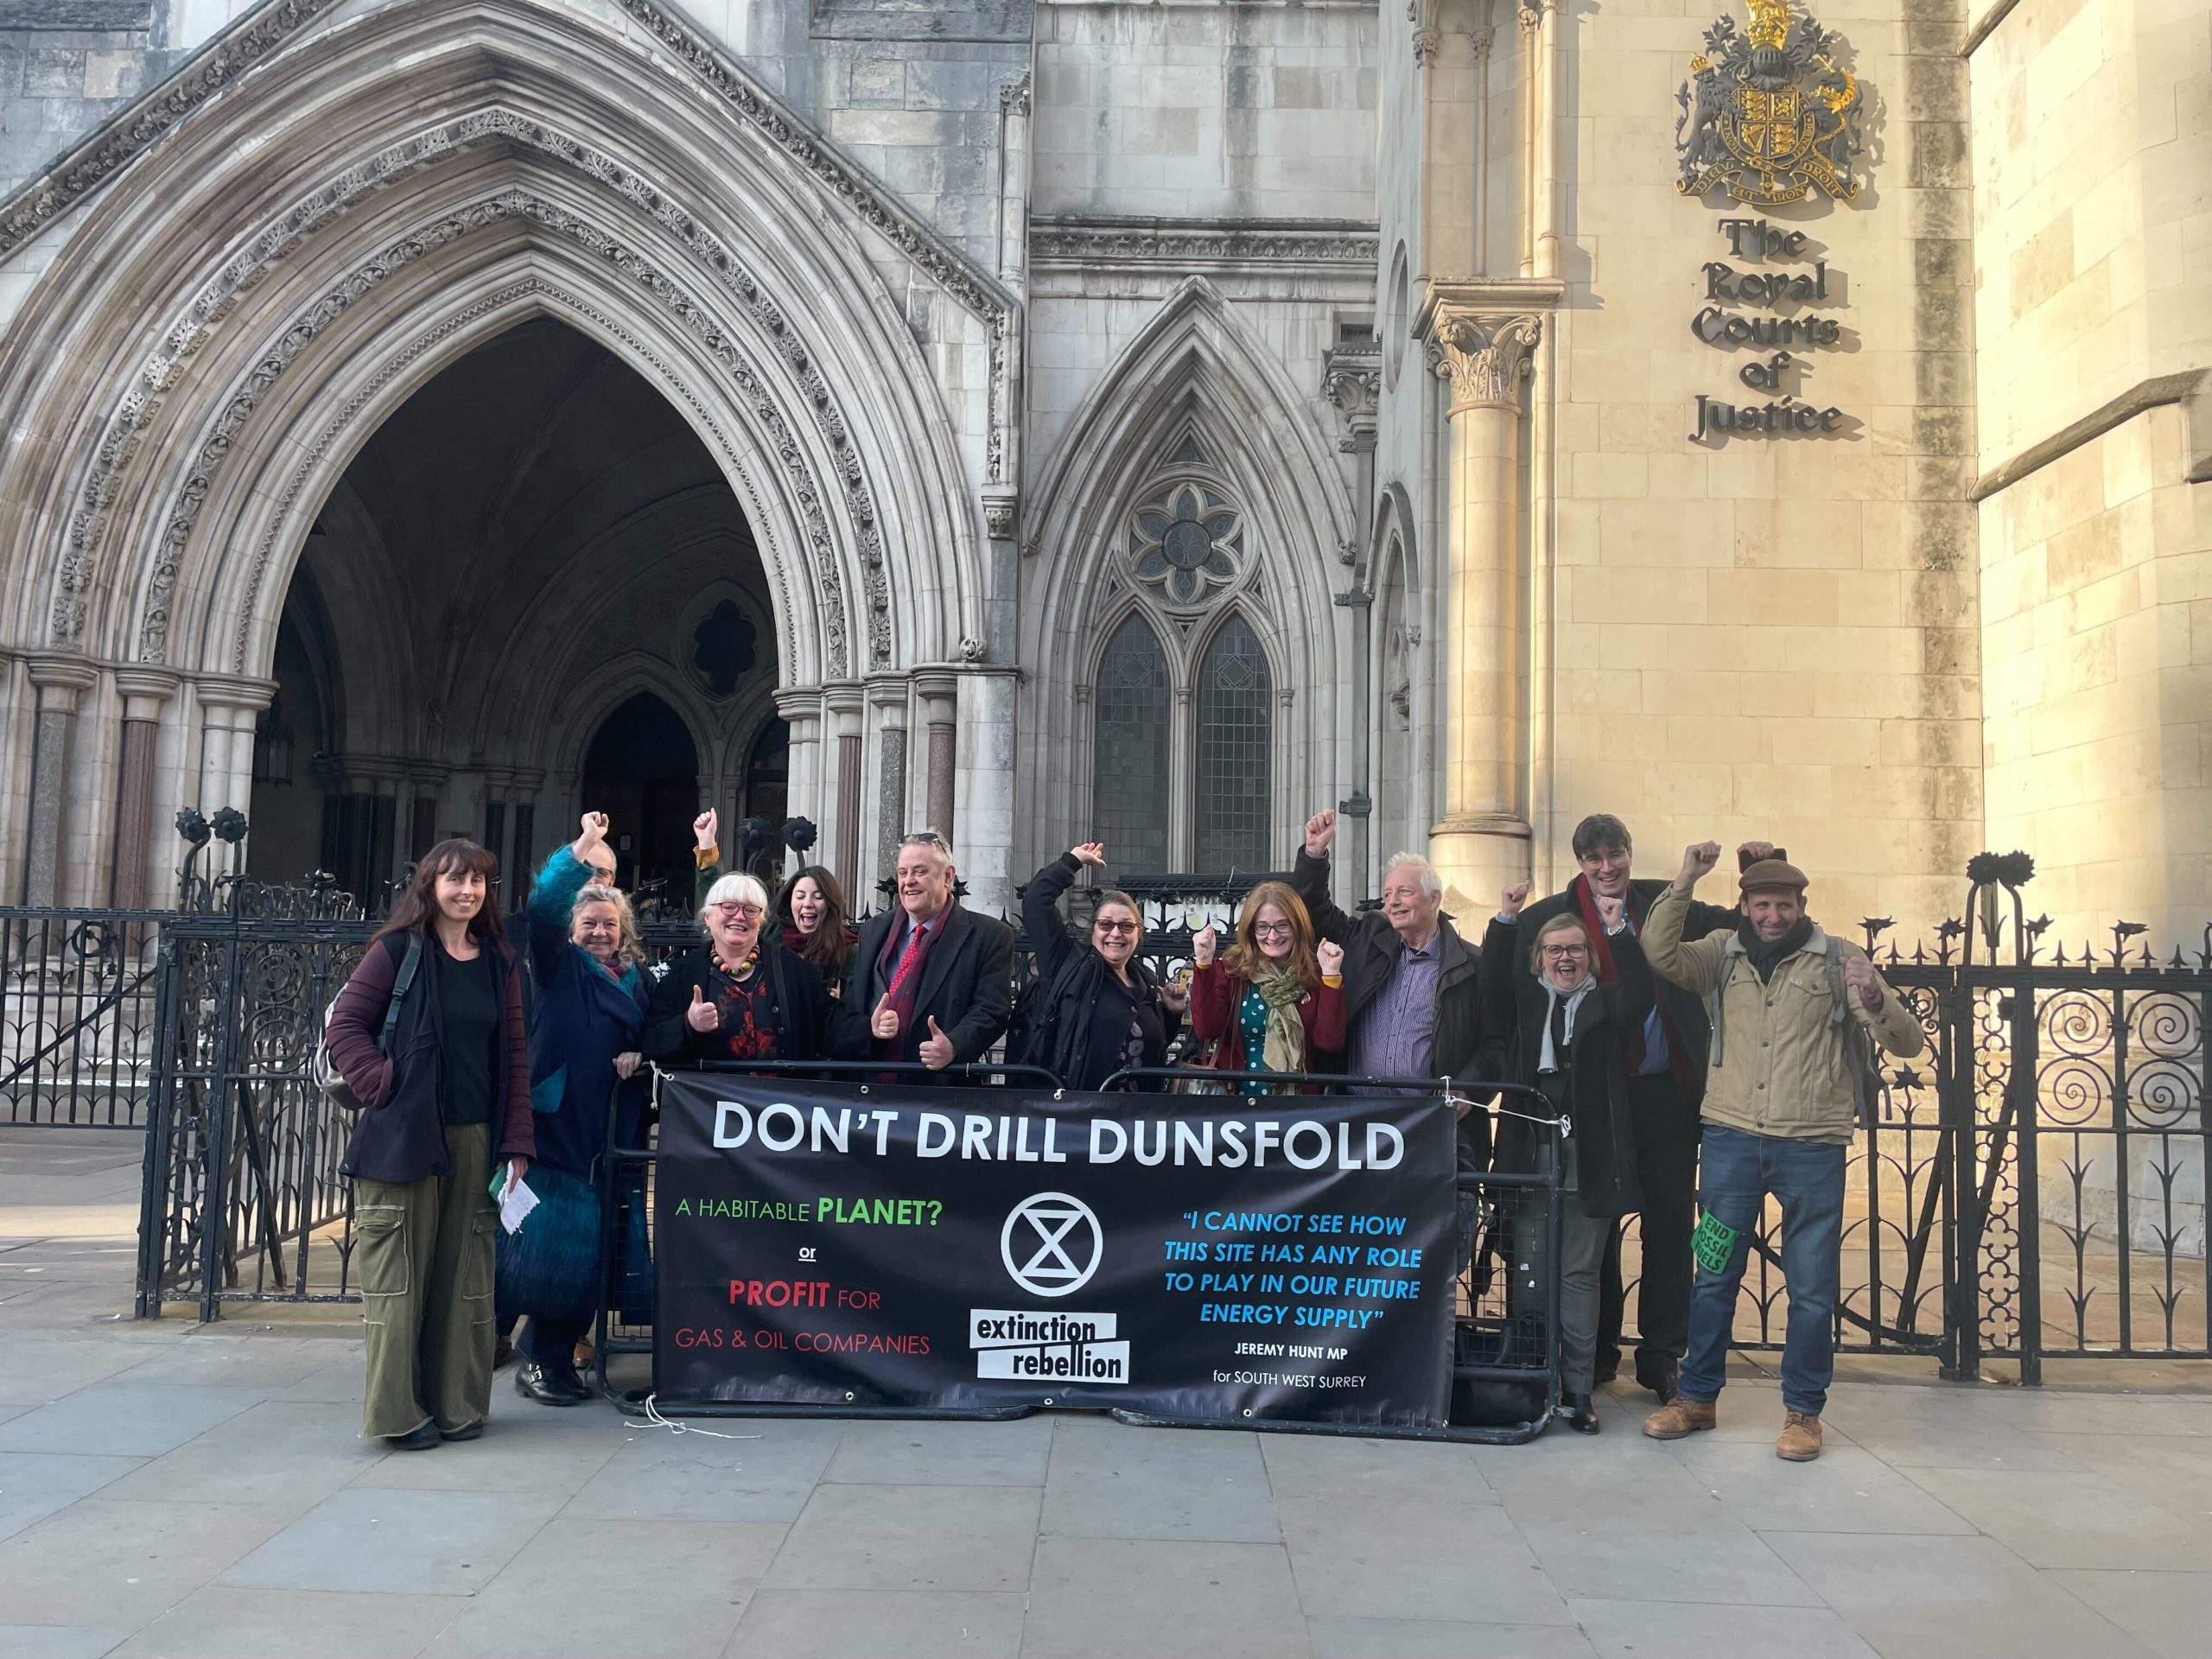 Dunsfold-campaigners-celebrating-outside-the-Royal-Courts-of-Justice-in-March